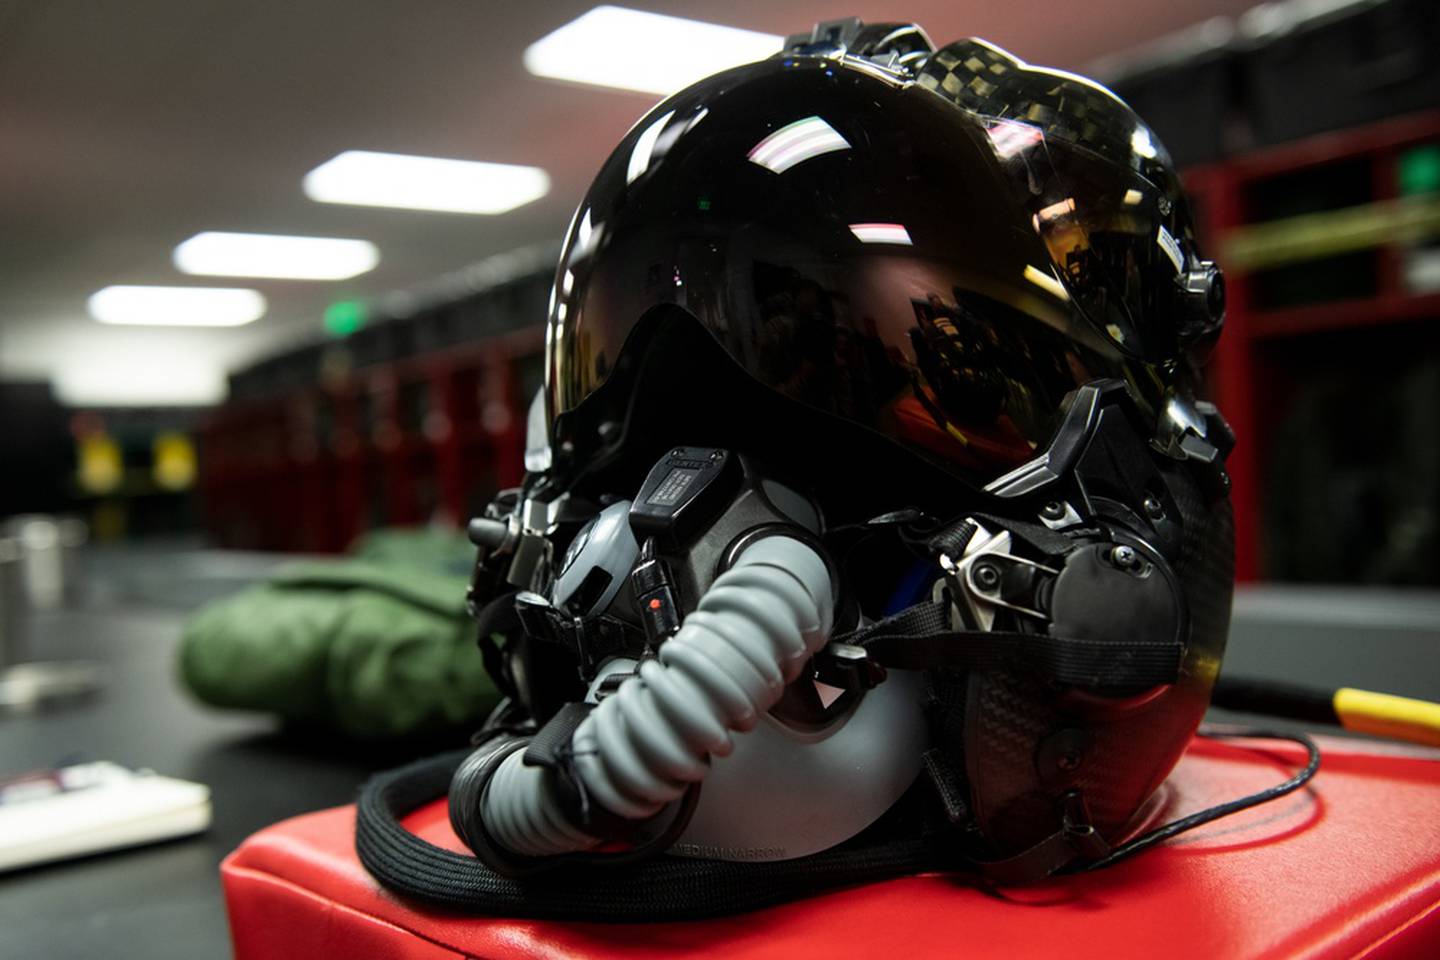 Designed to work with the F-35 Lightning II, the custom-fitted helmet serves to increase pilot responsiveness through enhanced situational awareness. (Senior Airman Erica Webster/Air Force)